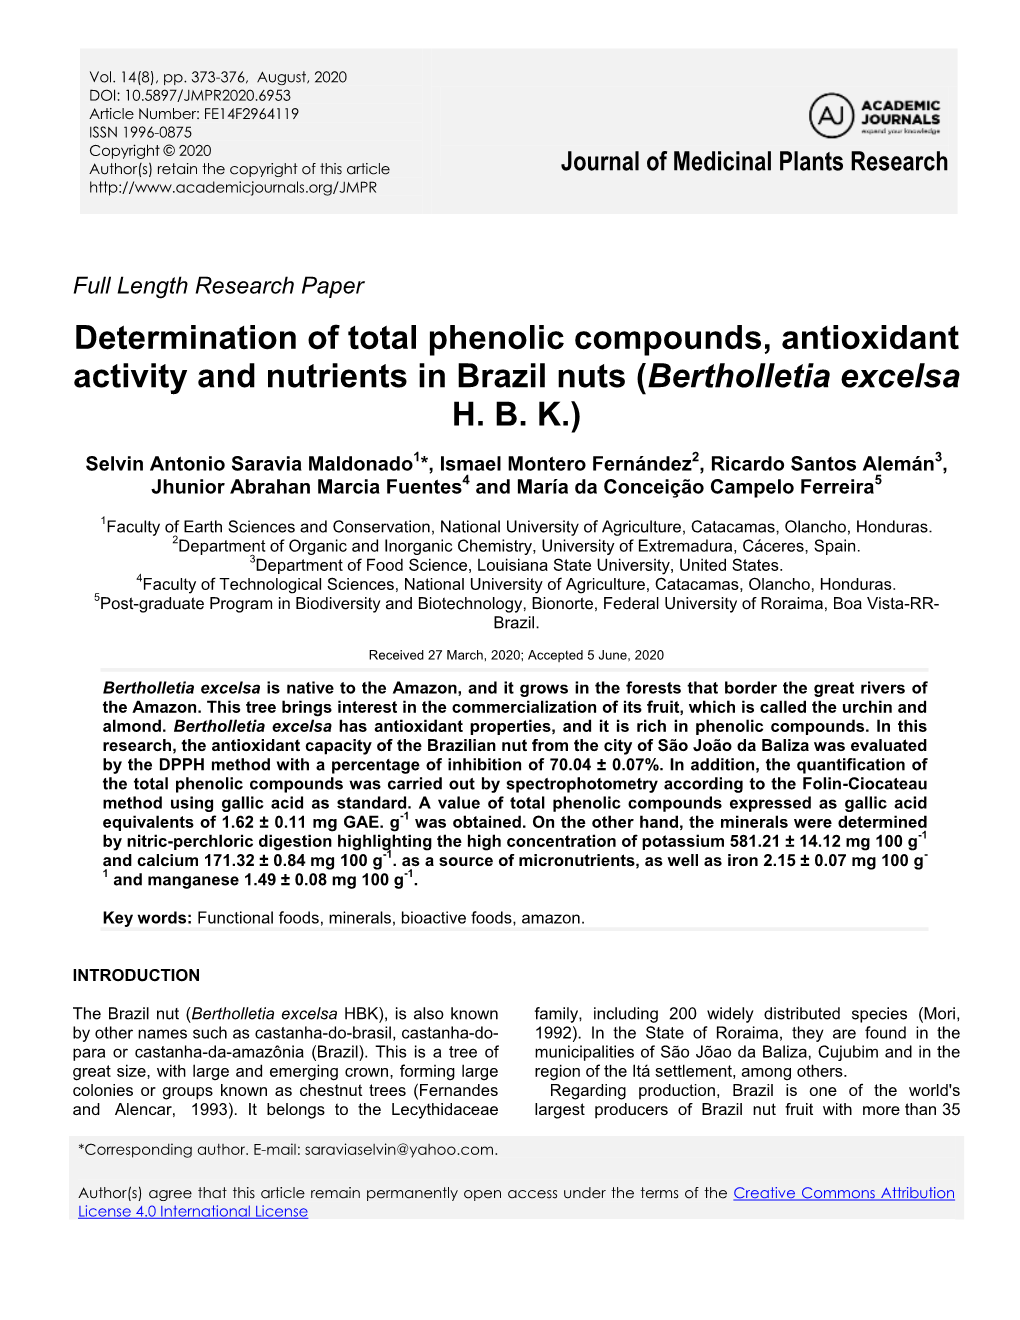 Determination of Total Phenolic Compounds, Antioxidant Activity and Nutrients in Brazil Nuts (Bertholletia Excelsa H